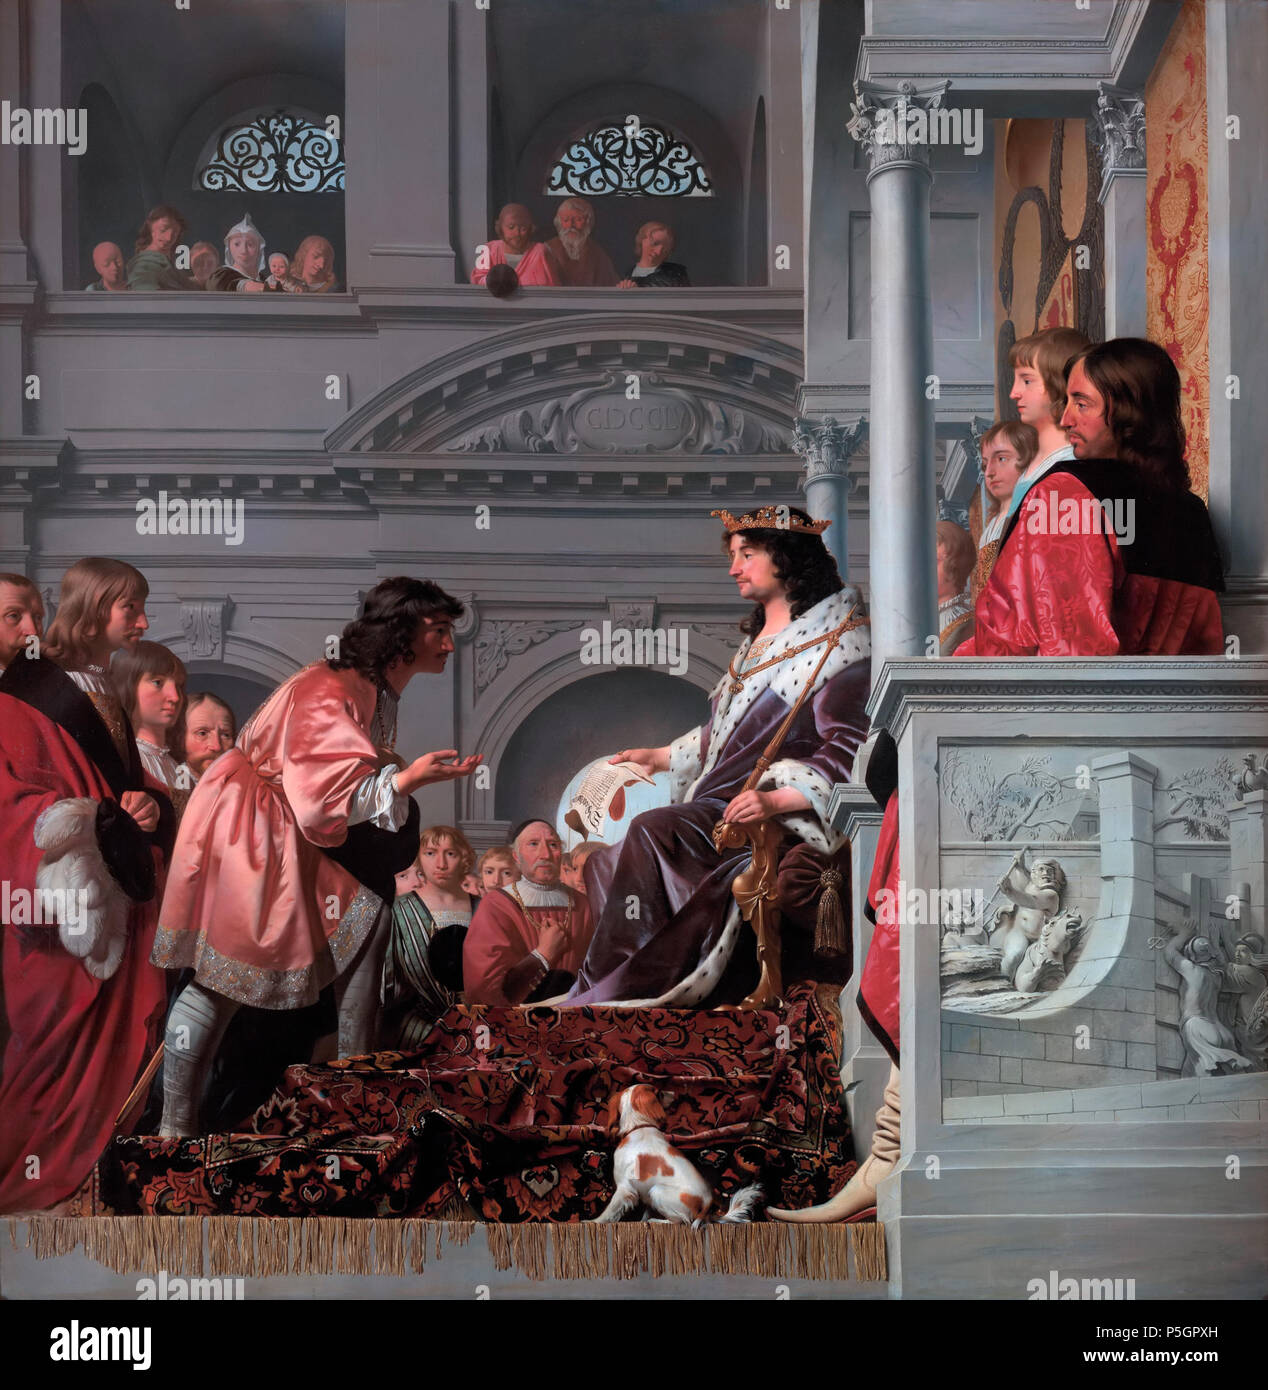 N/A. English: Count William II grants the charter to the Water Board of Rhineland oil on canvas 218 x 212 cm 1655  . 1655.   Caesar van Everdingen  (1616/1617–1678)     Alternative names Cesar Boetius van Everdingen, Boetius van Everdingen, Caesar Bovetius van Everdingen, Cesar Bovetius van Everdingen, Caesar Pietersz. van Everdingen, Cesar Pietersz. van Everdingen, Ceser van Everdingen, Cesar van Everdingen, Caesar Bovesis  Description Dutch painter, draughtsman and ornamental painter  Date of birth/death circa 1616-1617 13 October 1678 (buried)  Location of birth/death Alkmaar () Alkmaar  Wo Stock Photo